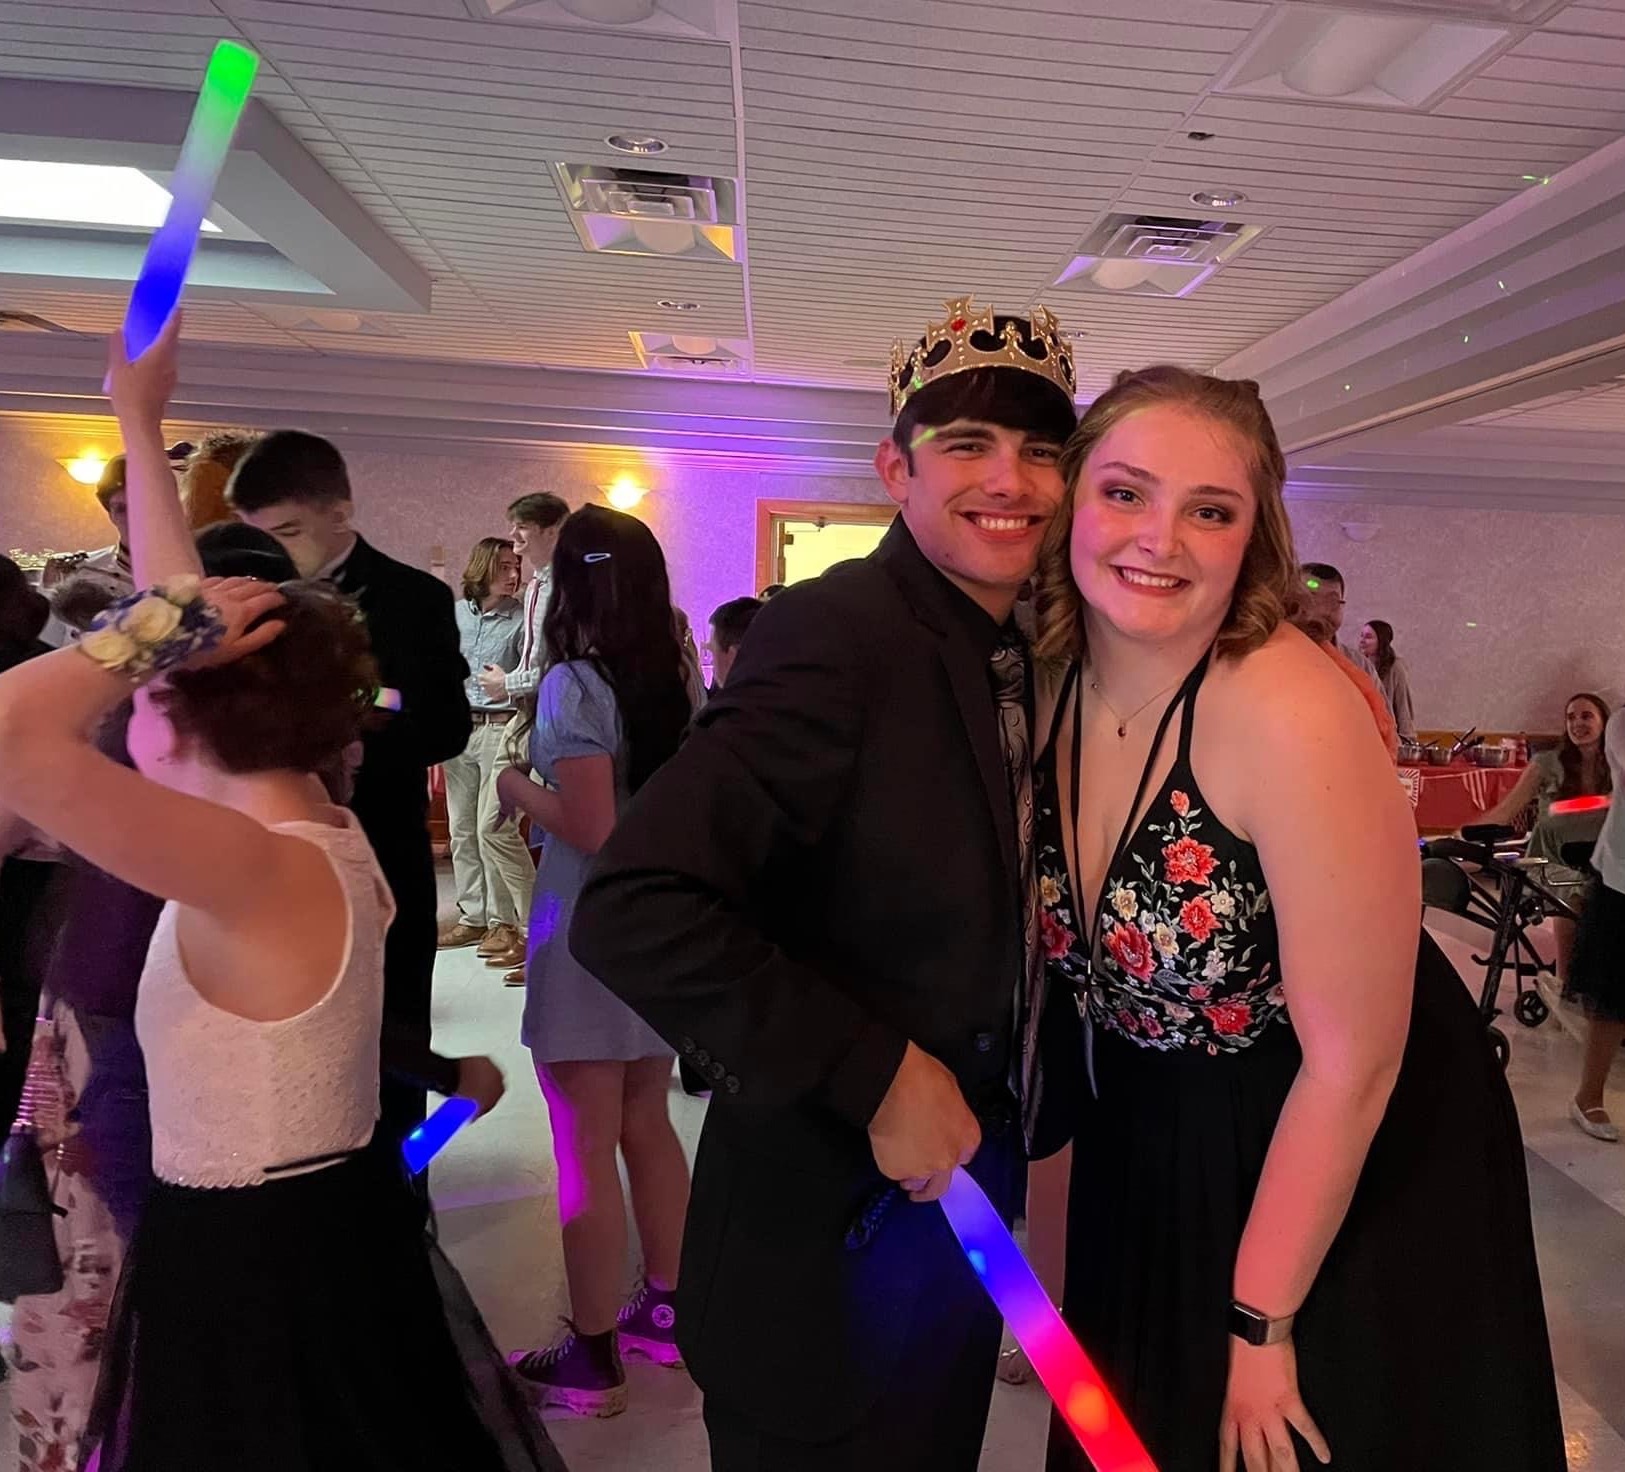 Scenes from the Fantastic Friends of WNY special needs prom at the Southline Firehall in Cheektowaga. (Images sent on behalf of Fantastic Friends of WNY)